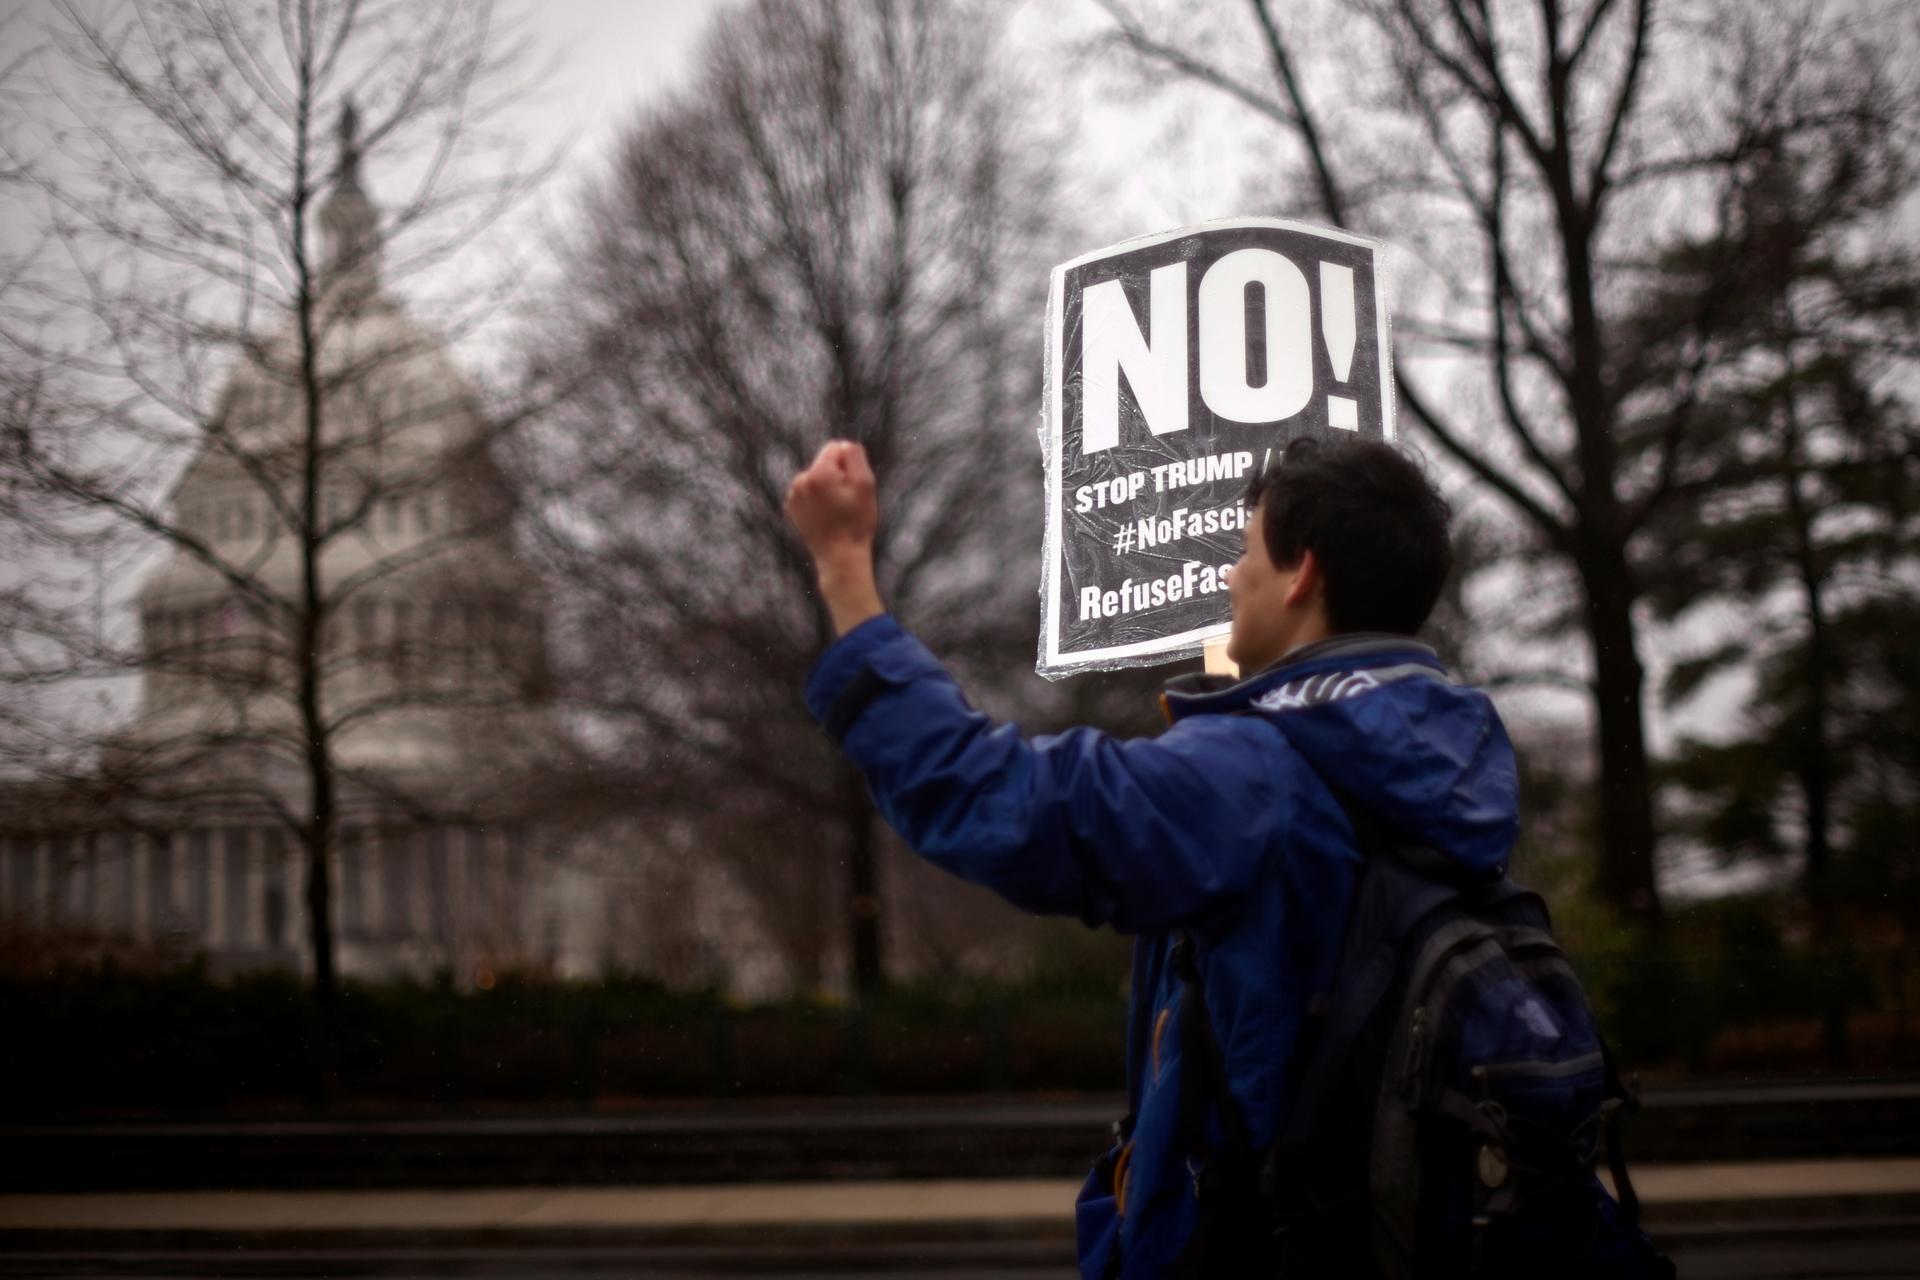 A protester organized by RefuseFascism.org participates in a demonstration outside the US Supreme Court